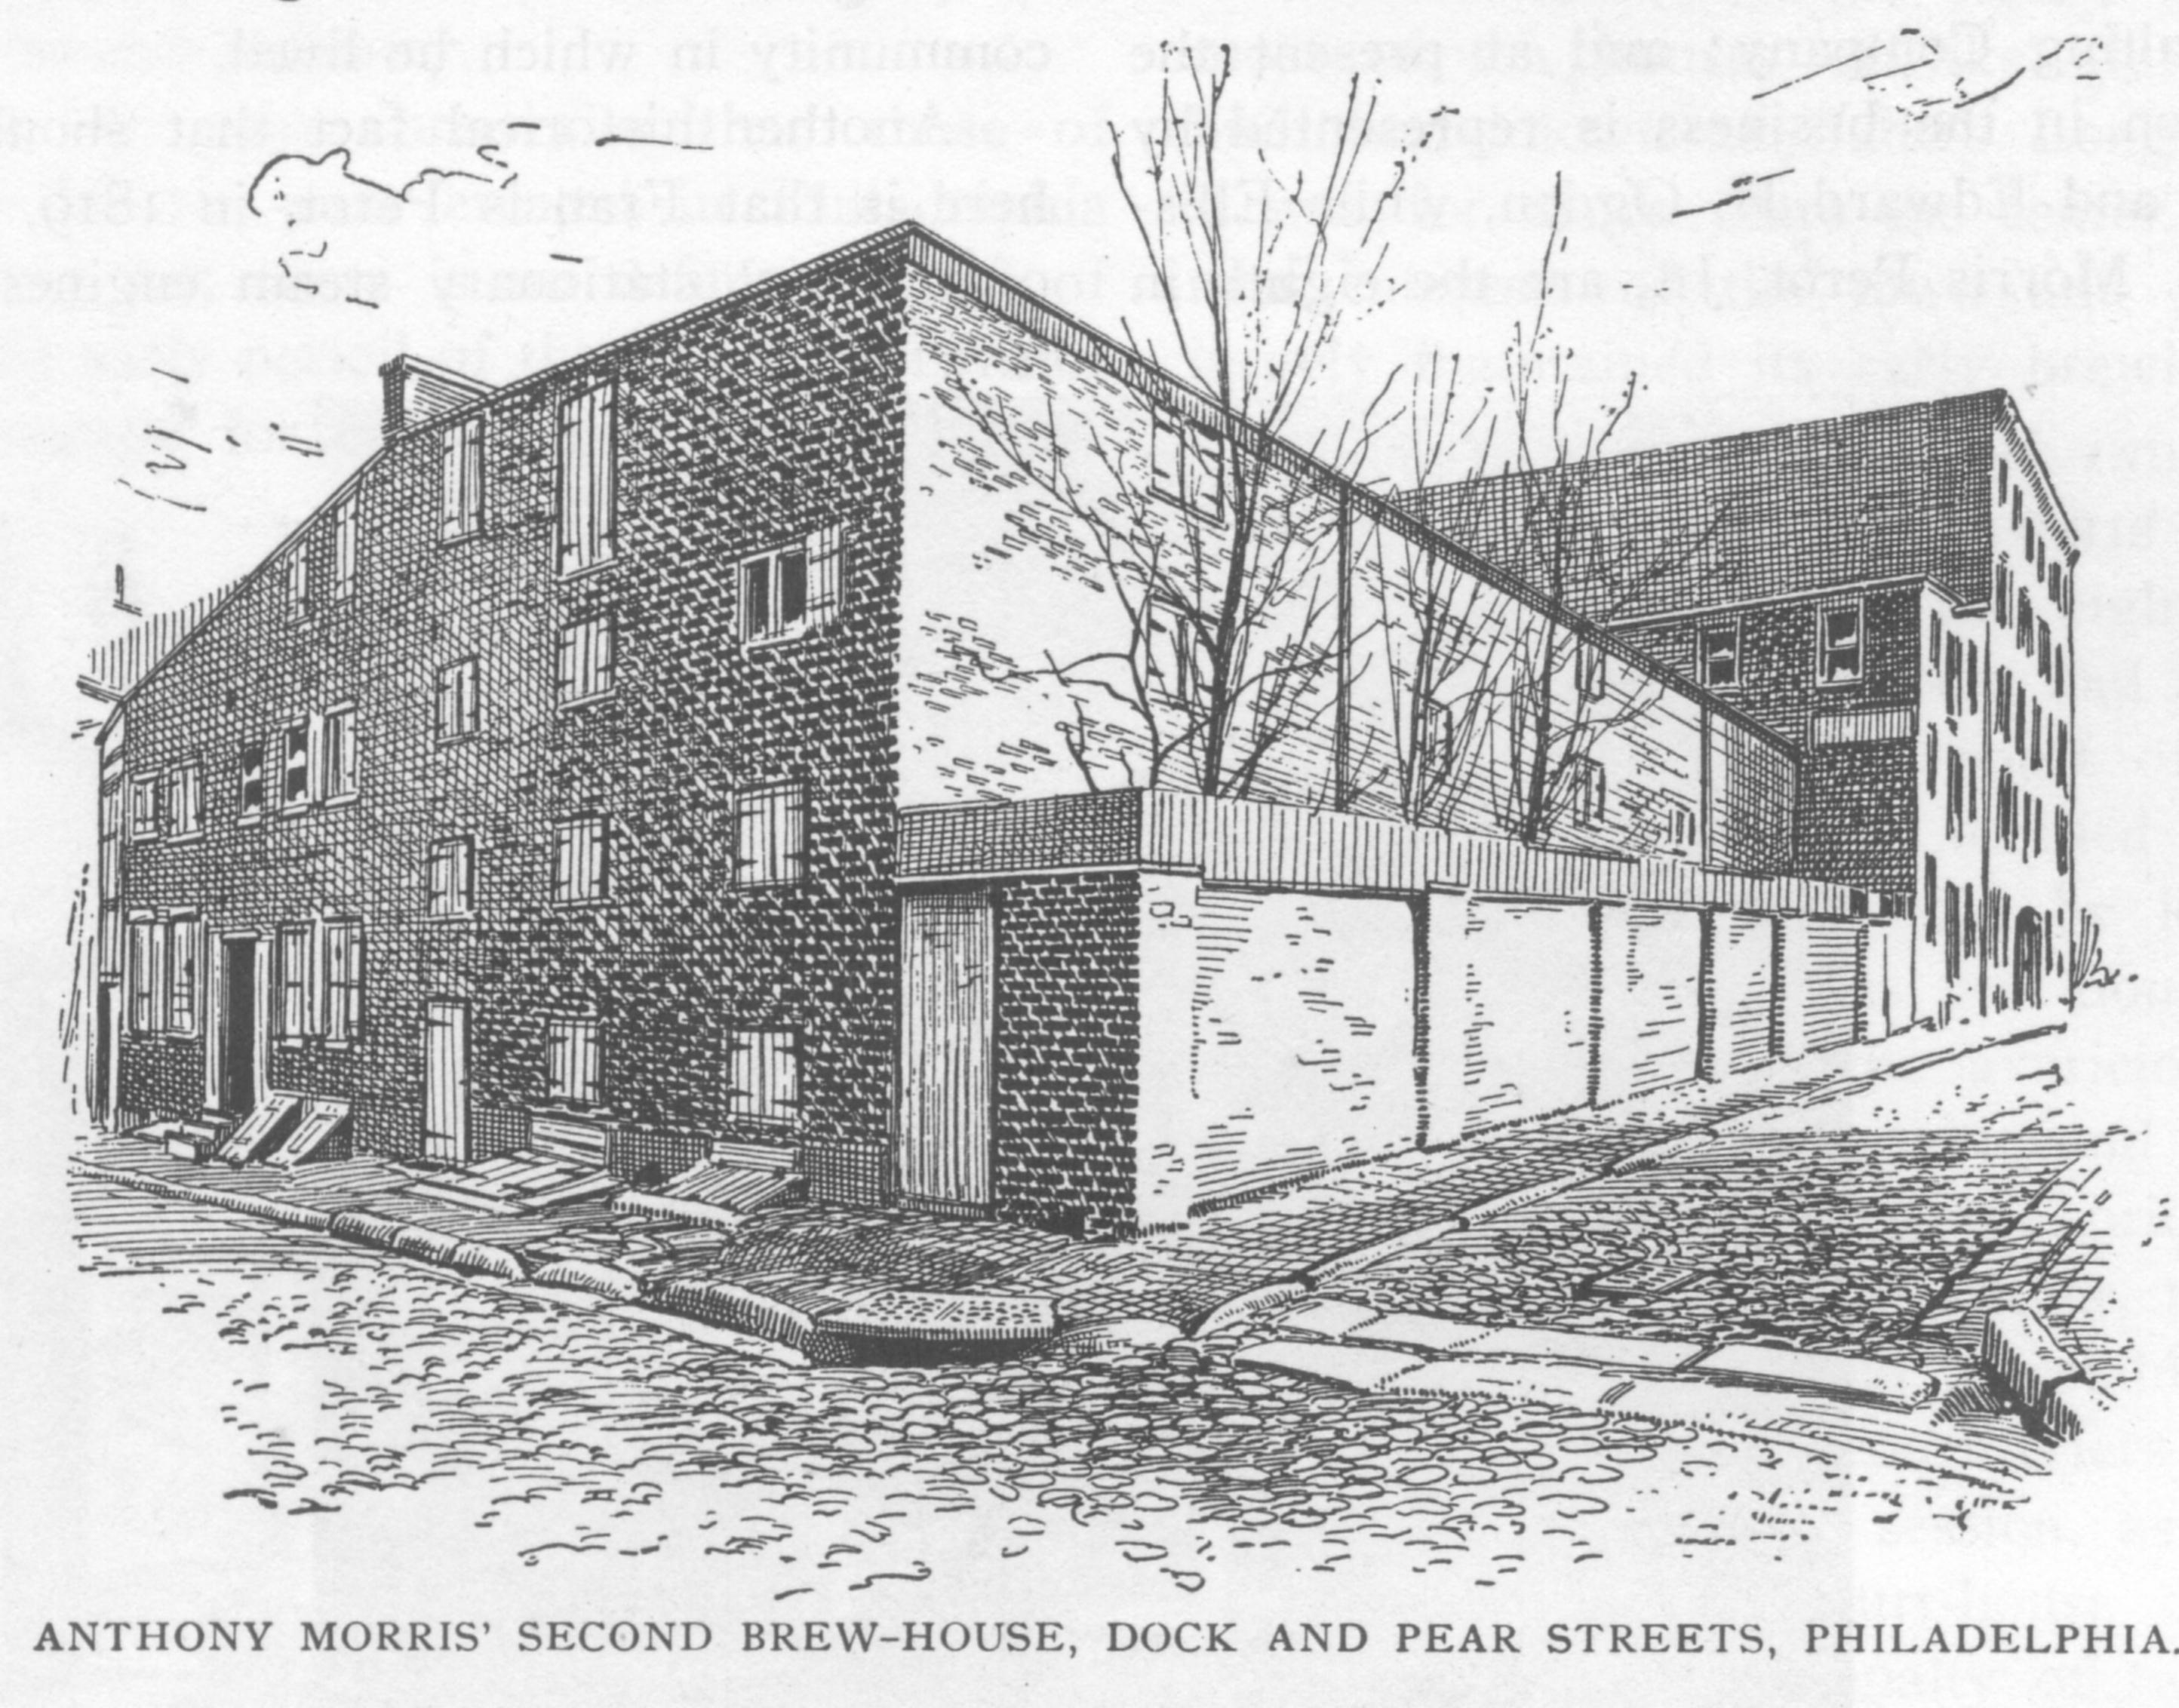 Morris Brewery Dock and Pear streets